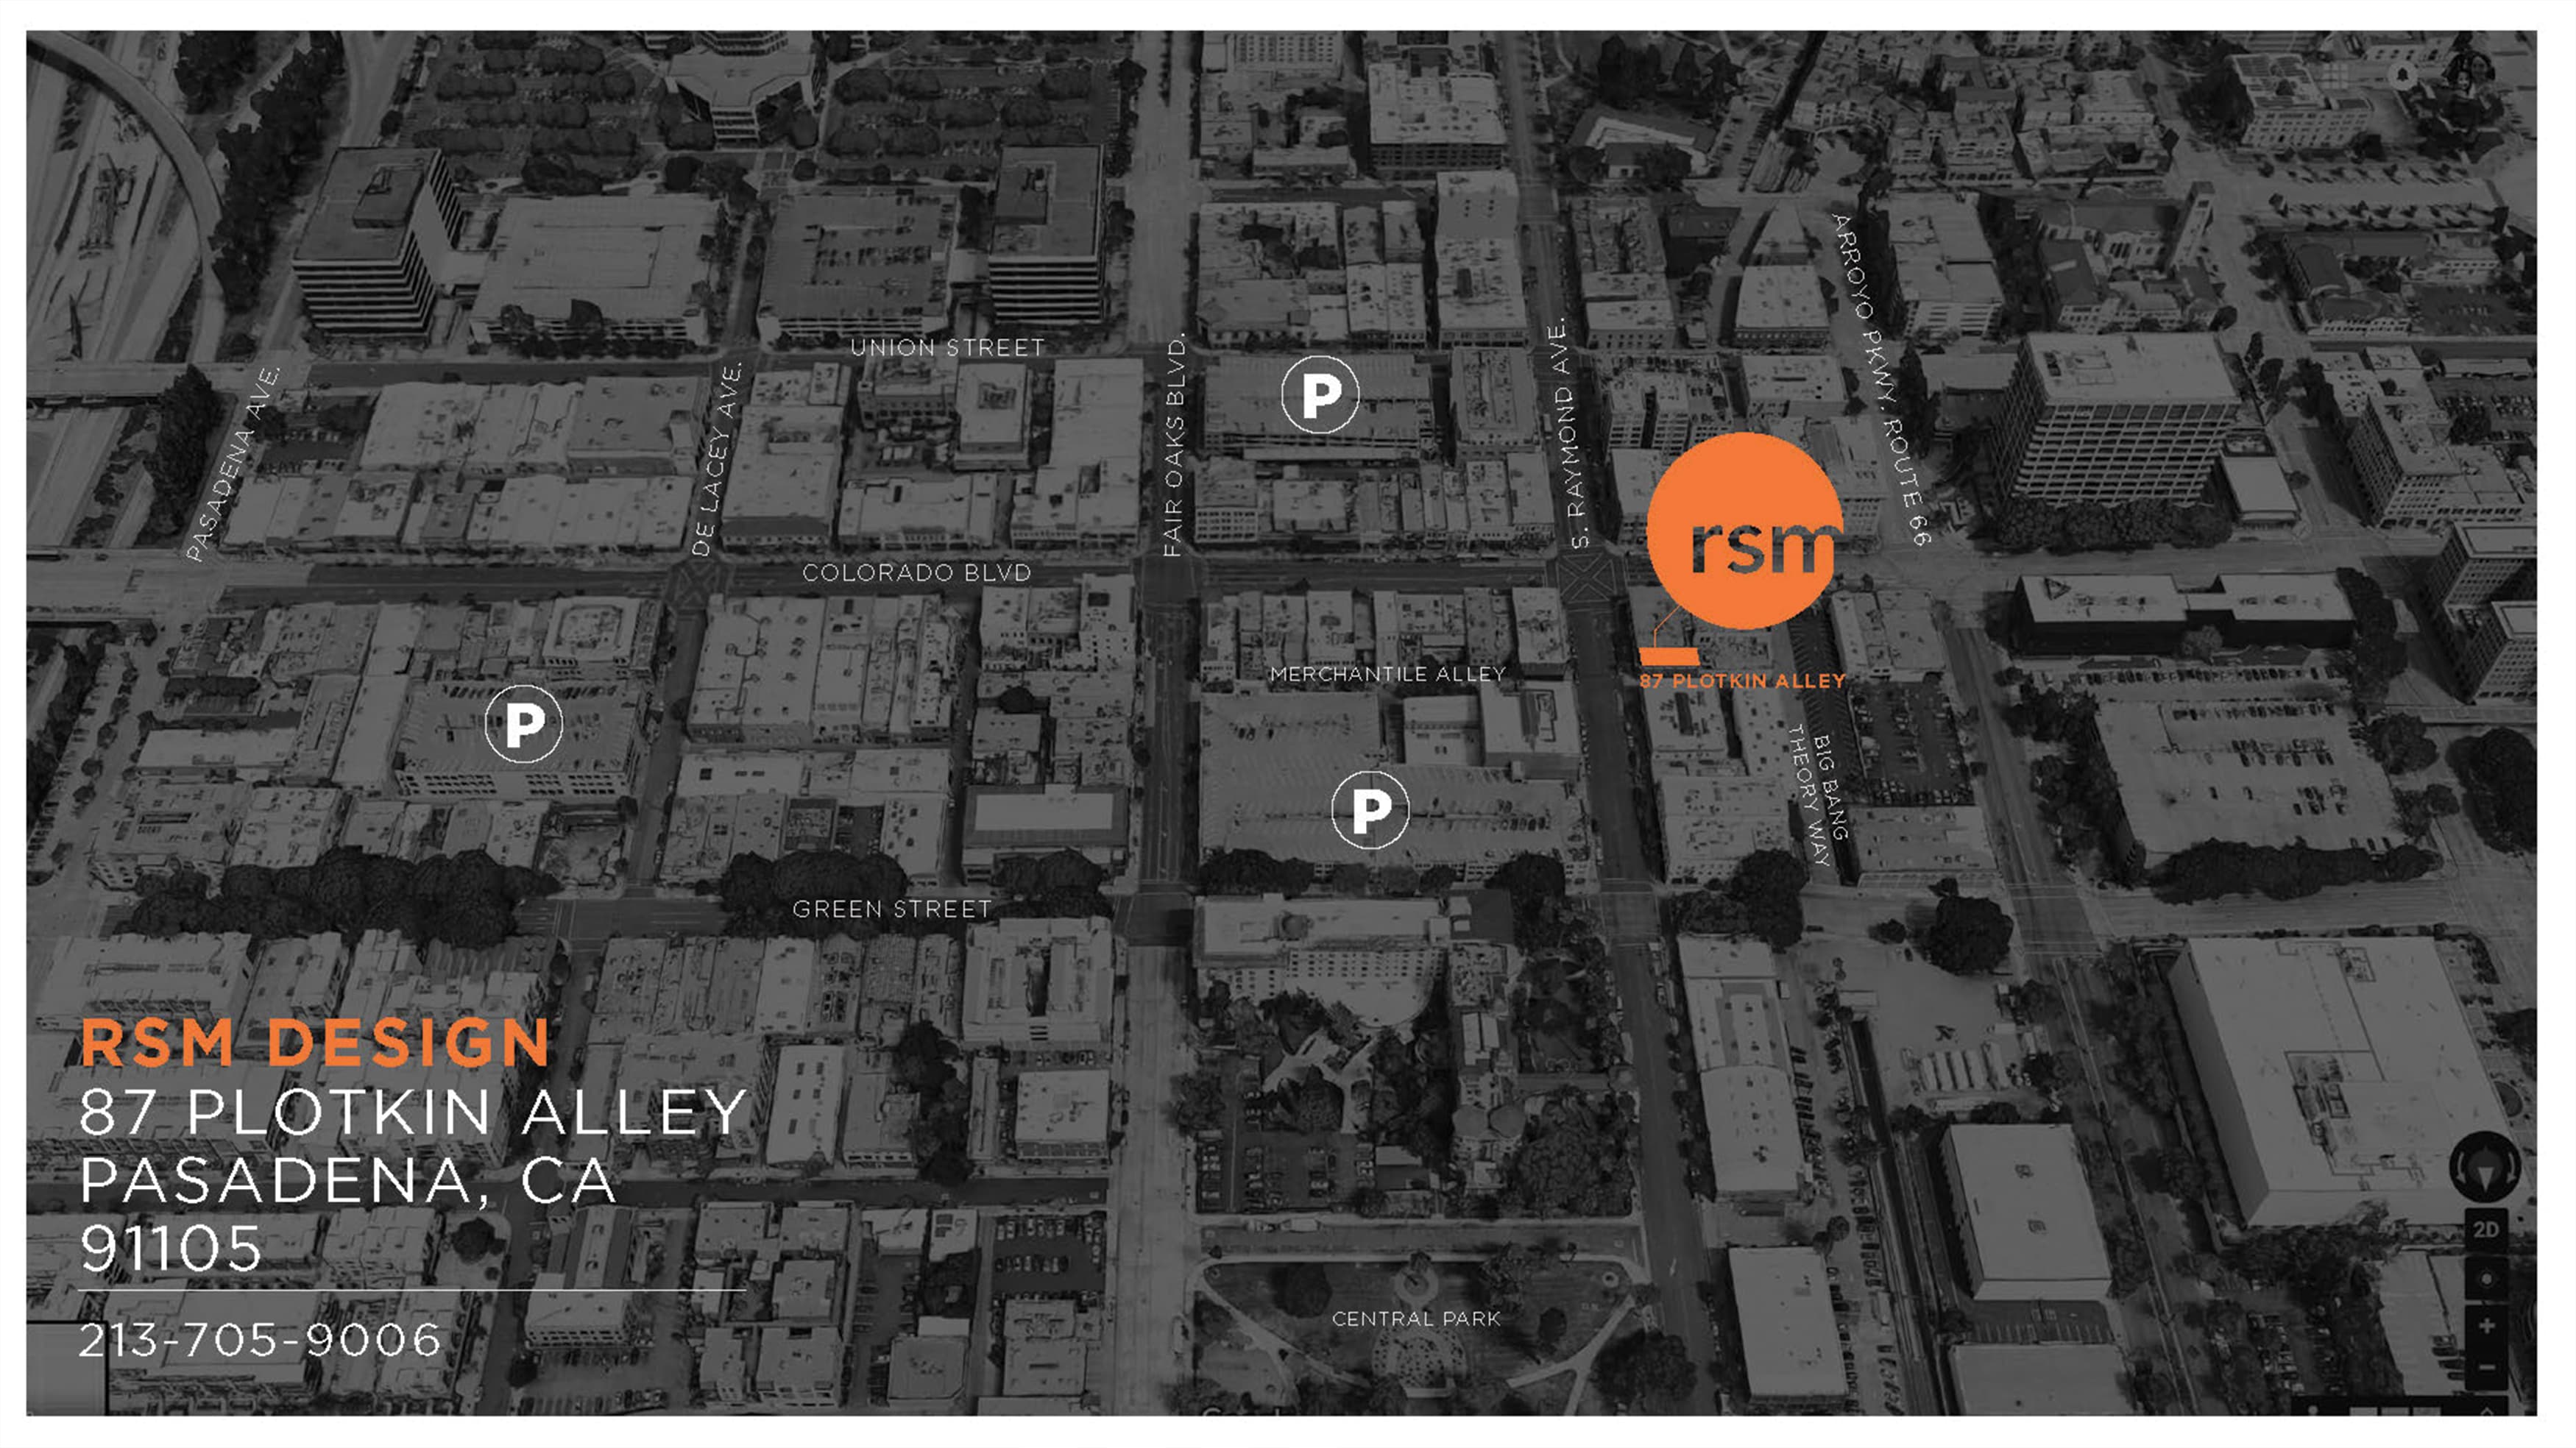 A map showing the location of the new Los Angeles office of RSM Design.